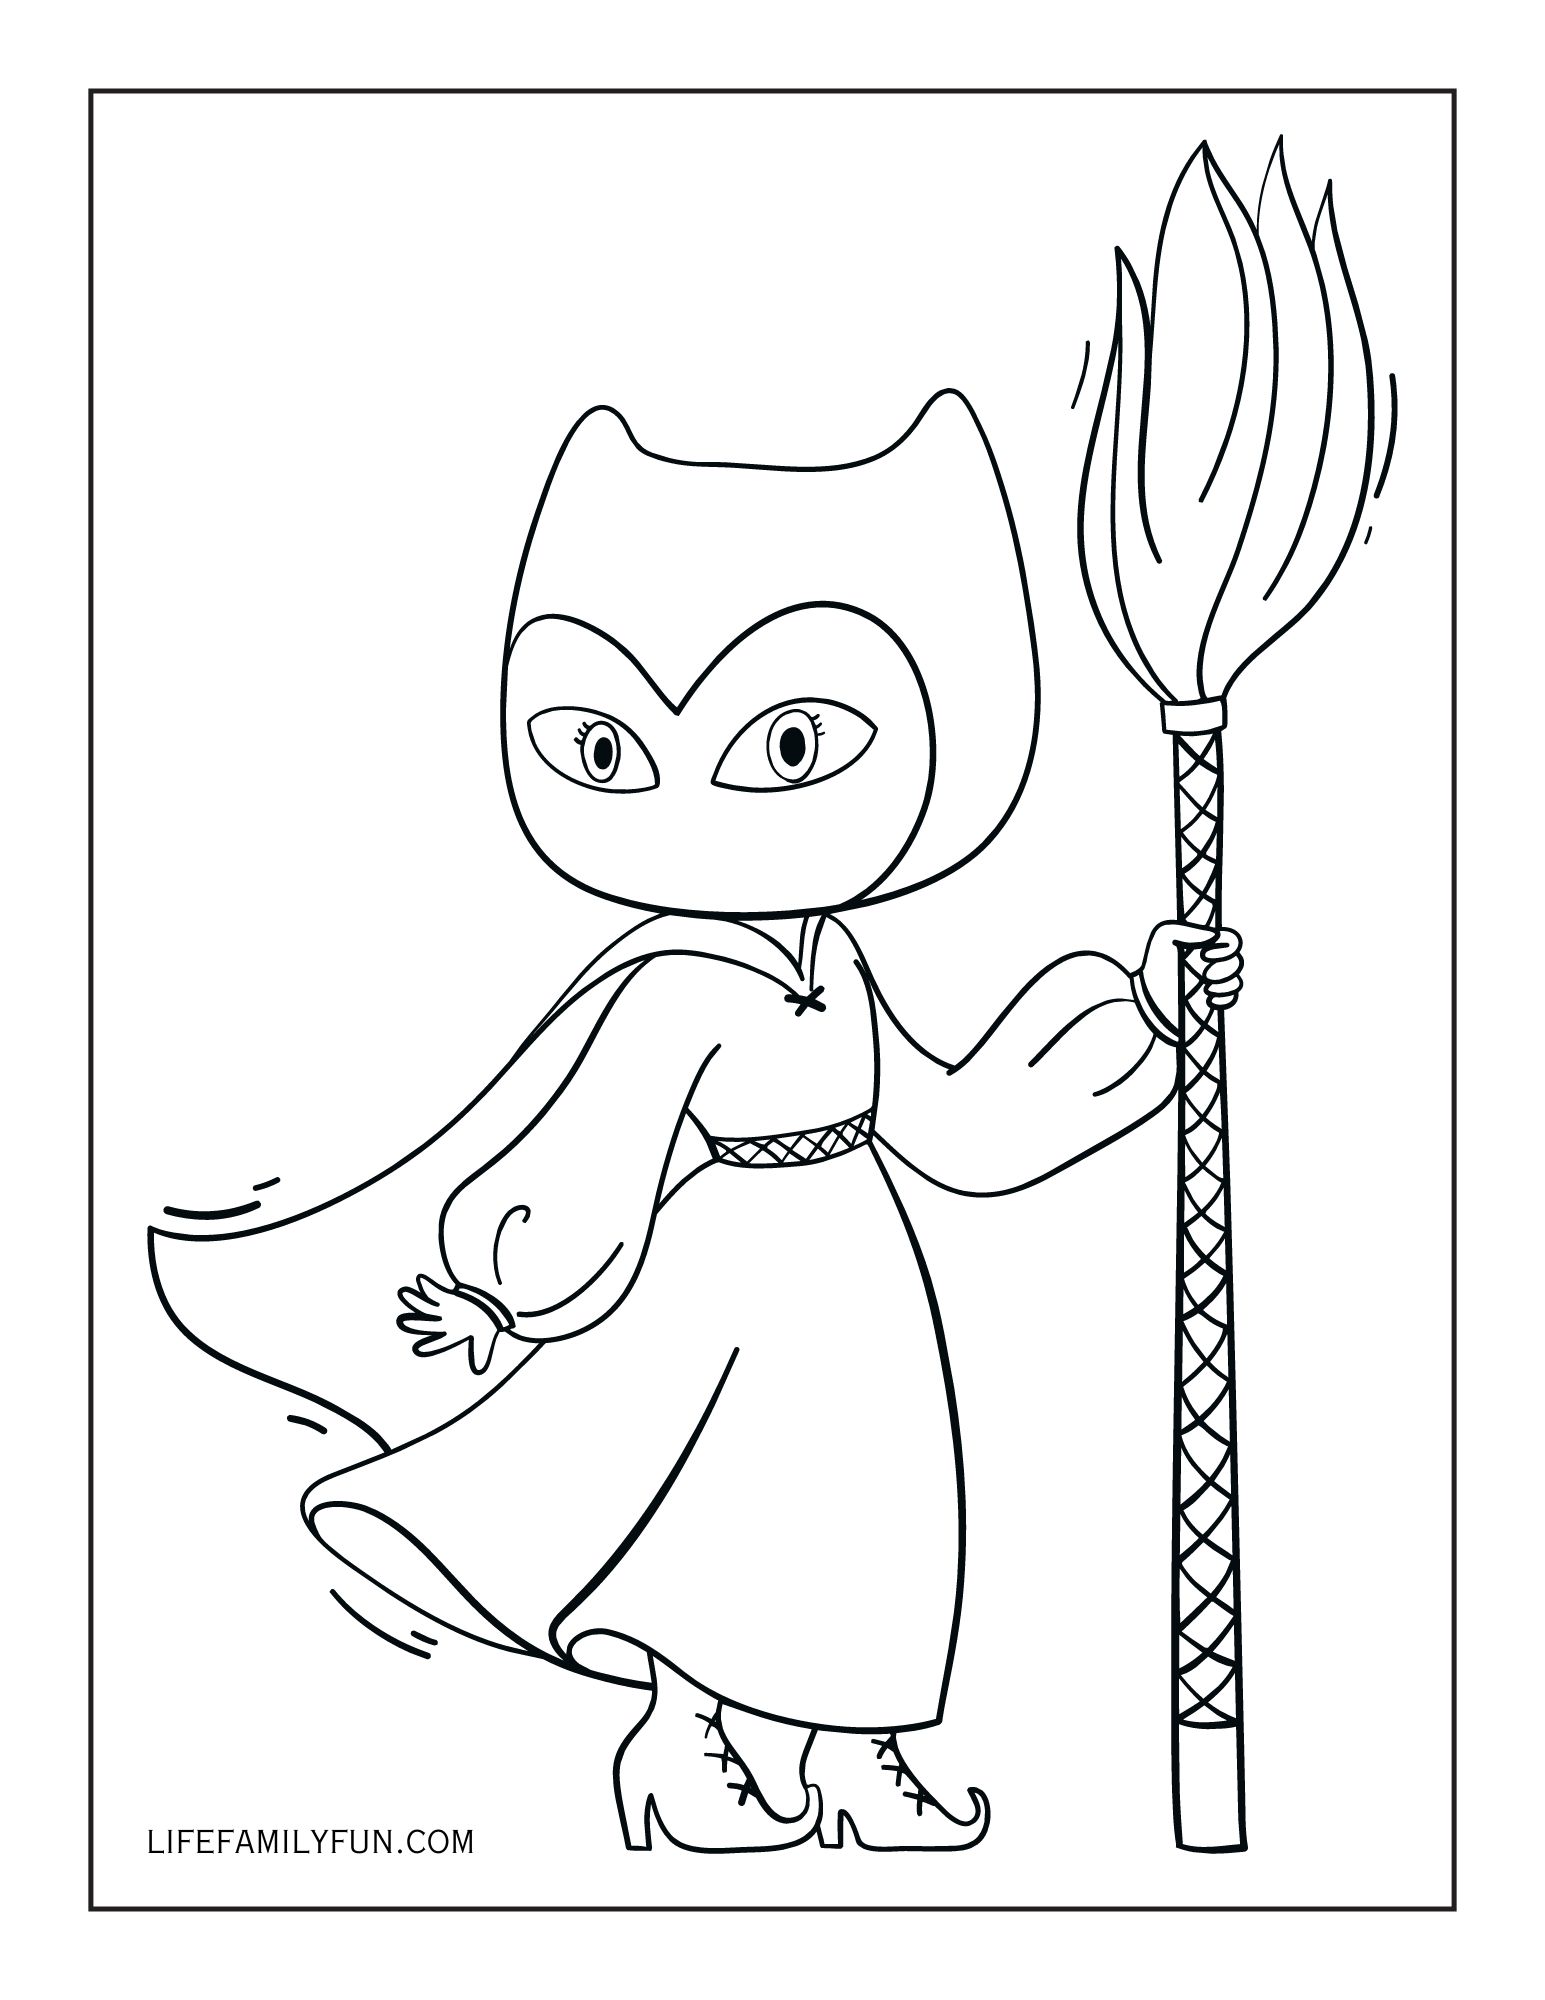 Halloween Witcher Coloring Page